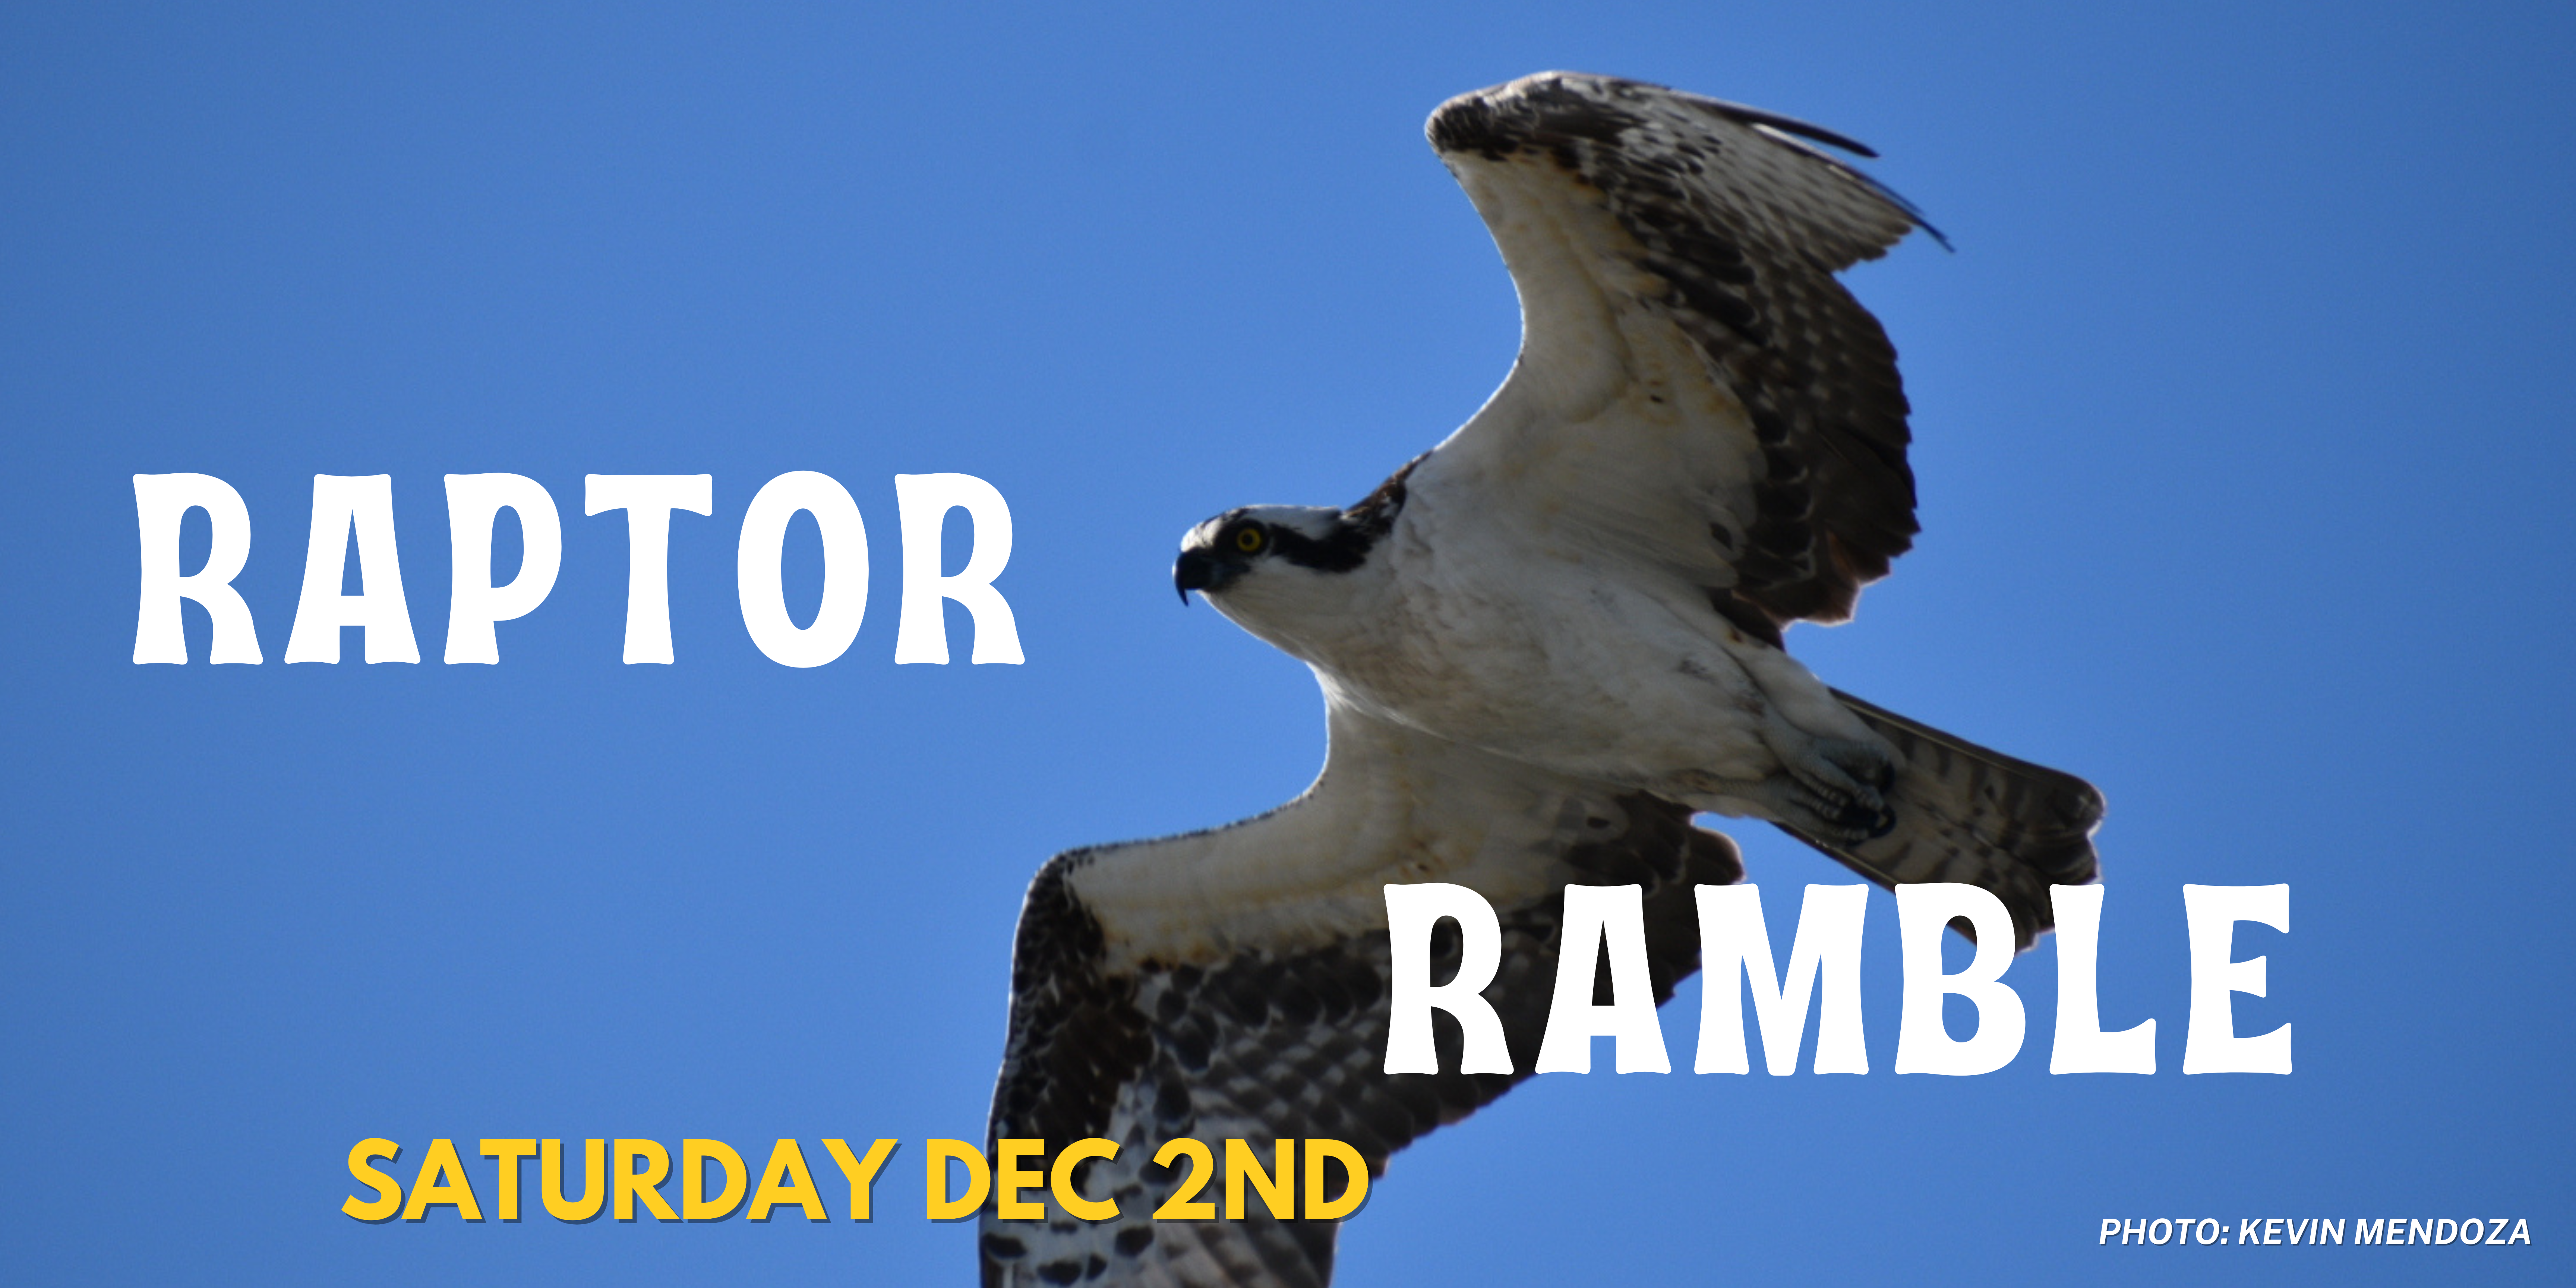 Our next nature walk will be the Raptor Ramble! Don’t forget to reserve your spot.